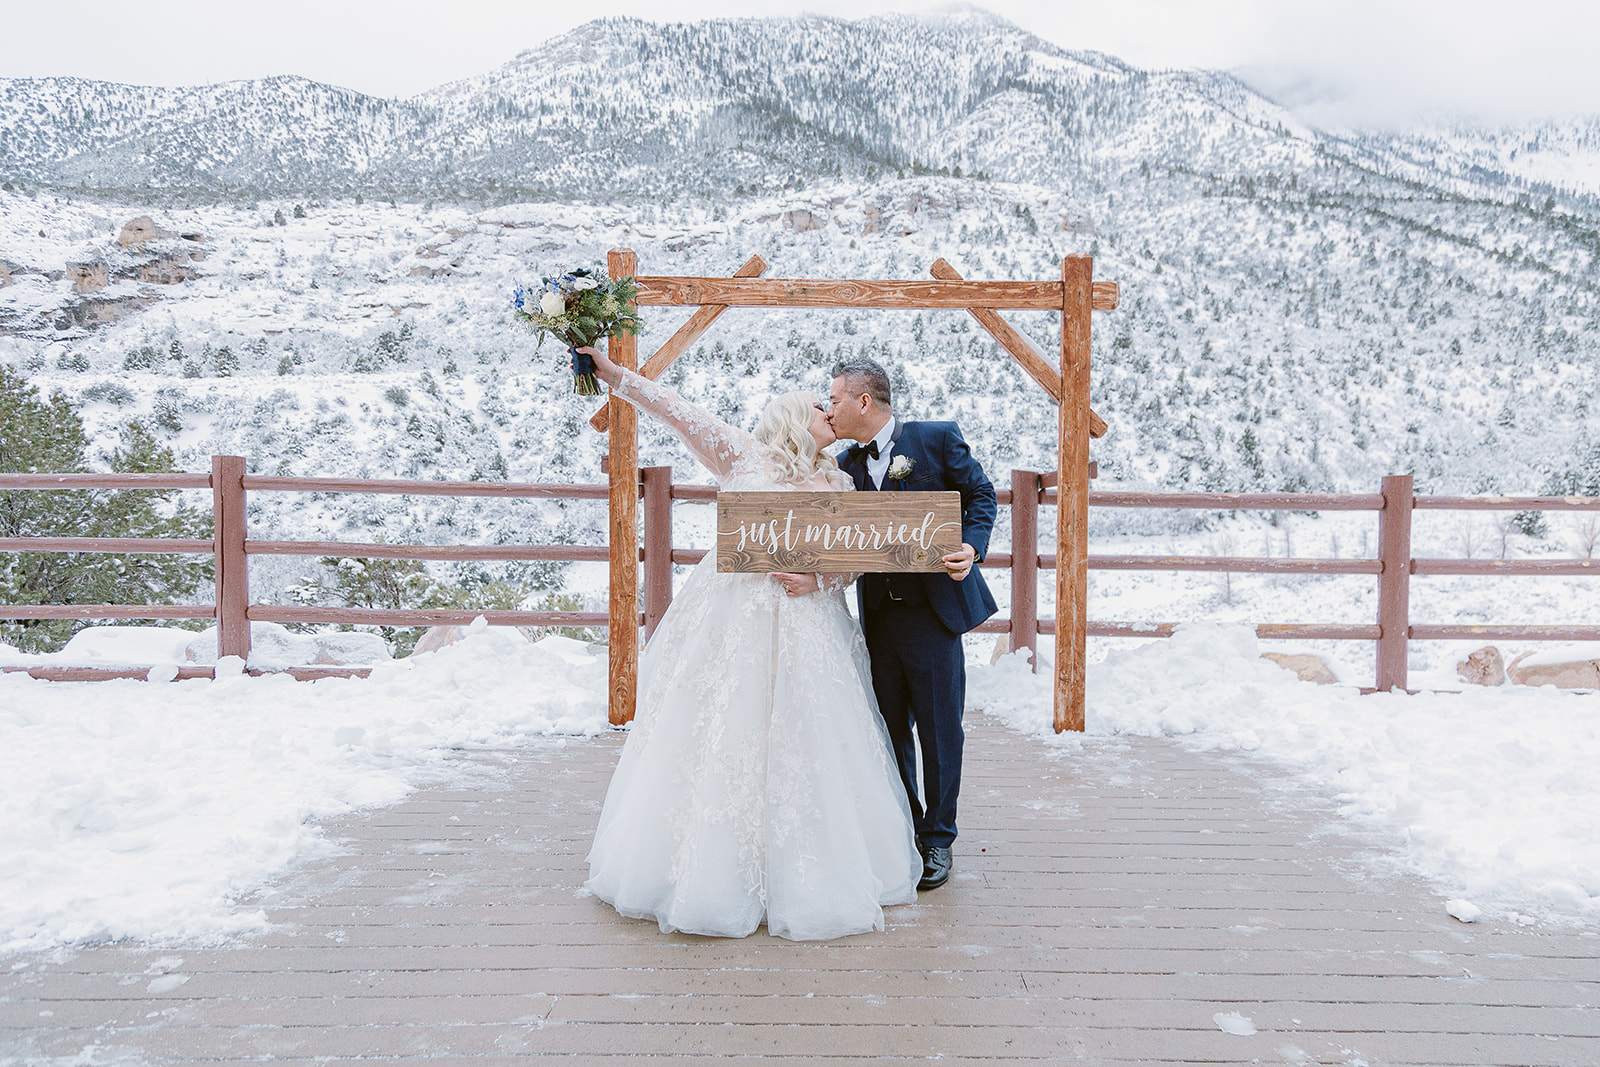 Bride and groom sharing a kiss as they hold up Just Married sign during Mount Charleston wedding shoot